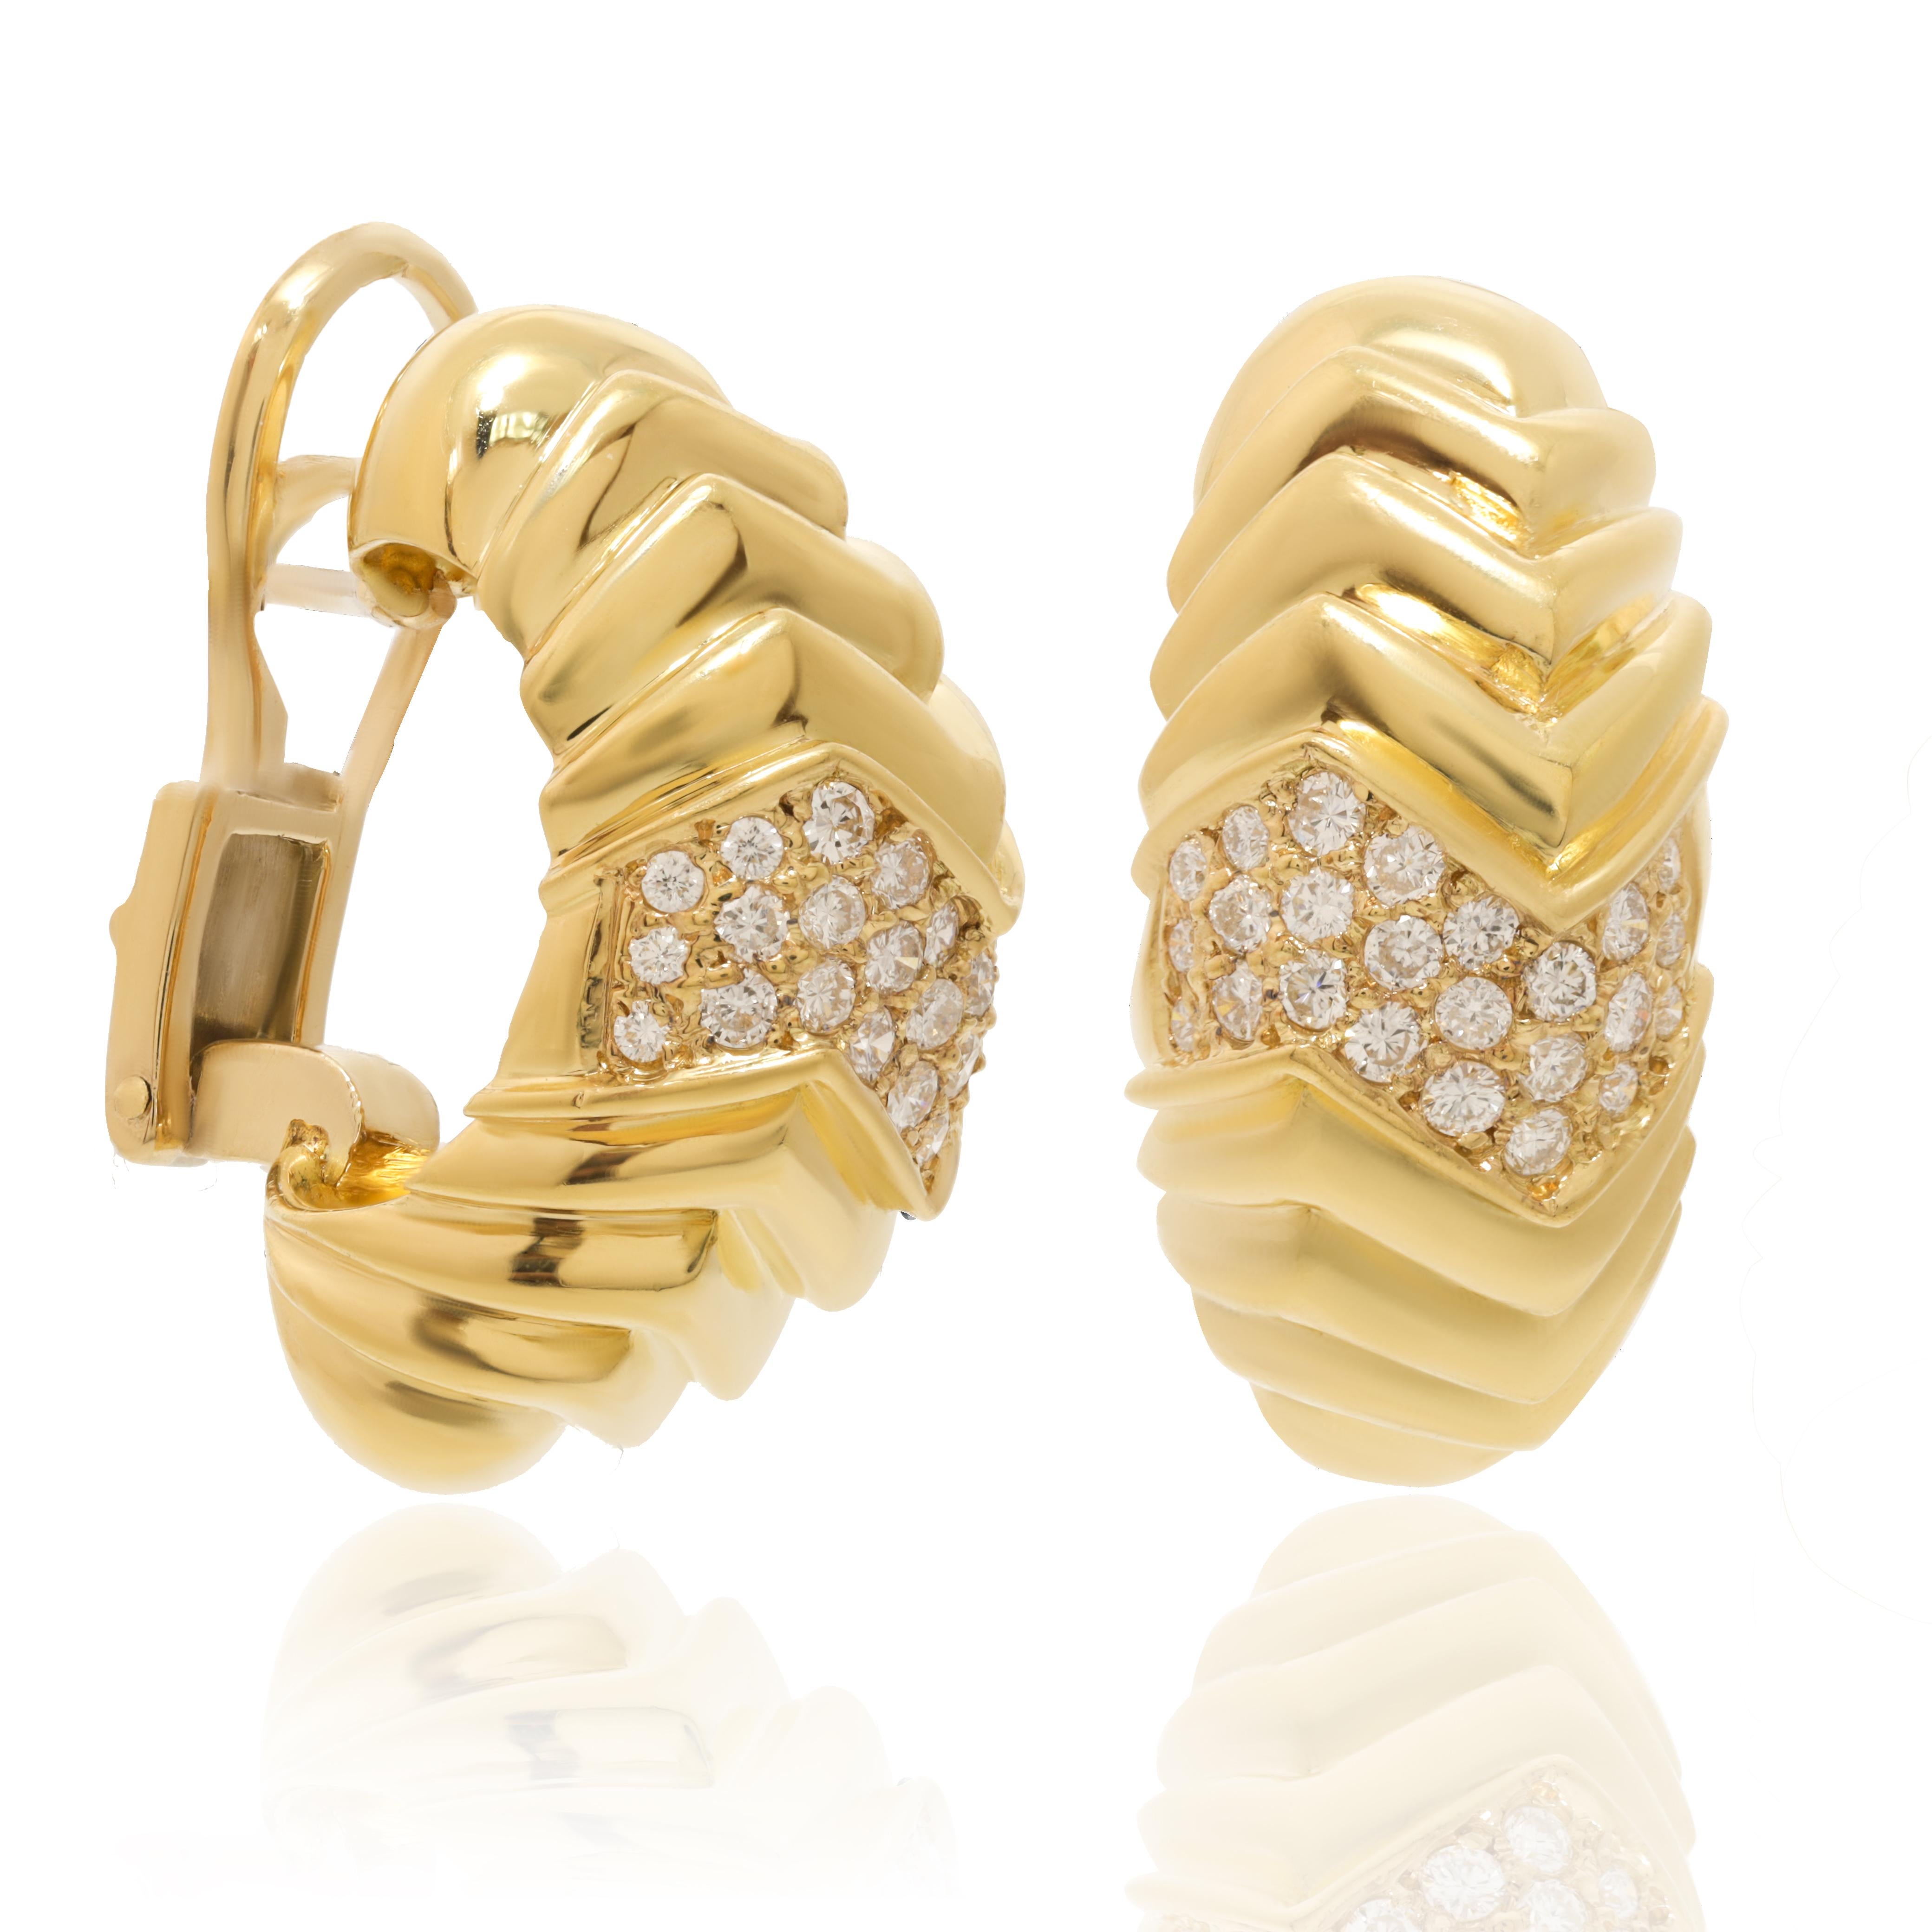 18 kt yellow gold diamond earrings adorned with 1.50 cts tw of diamonds with zig zag grooves.
Diana M. is a leading supplier of top-quality fine jewelry for over 35 years.
Diana M is one-stop shop for all your jewelry shopping, carrying line of